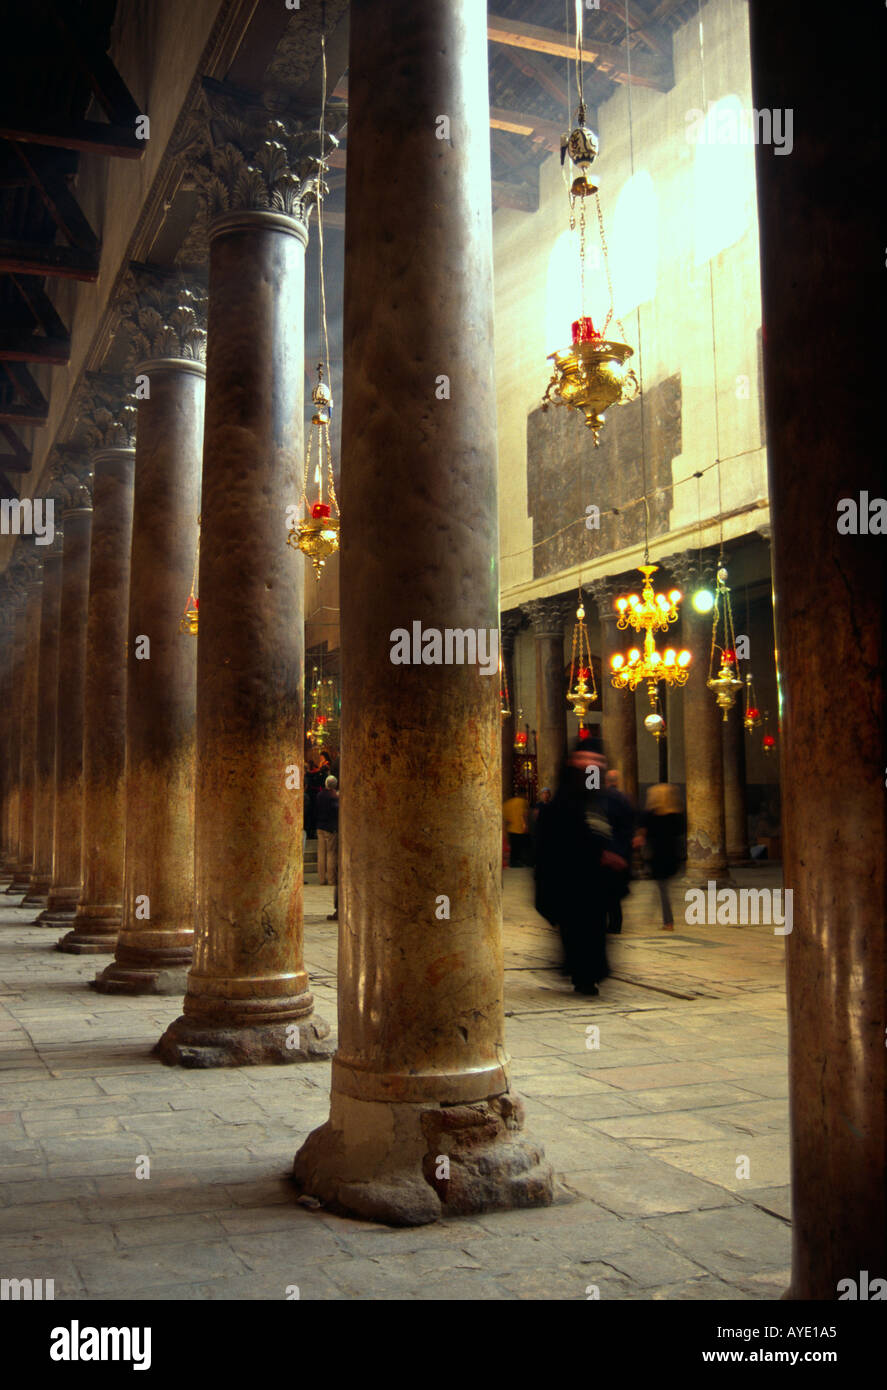 Palestinian Authority Bethlehem Church of the Nativity interior view with columns and walking priest Vert Stock Photo